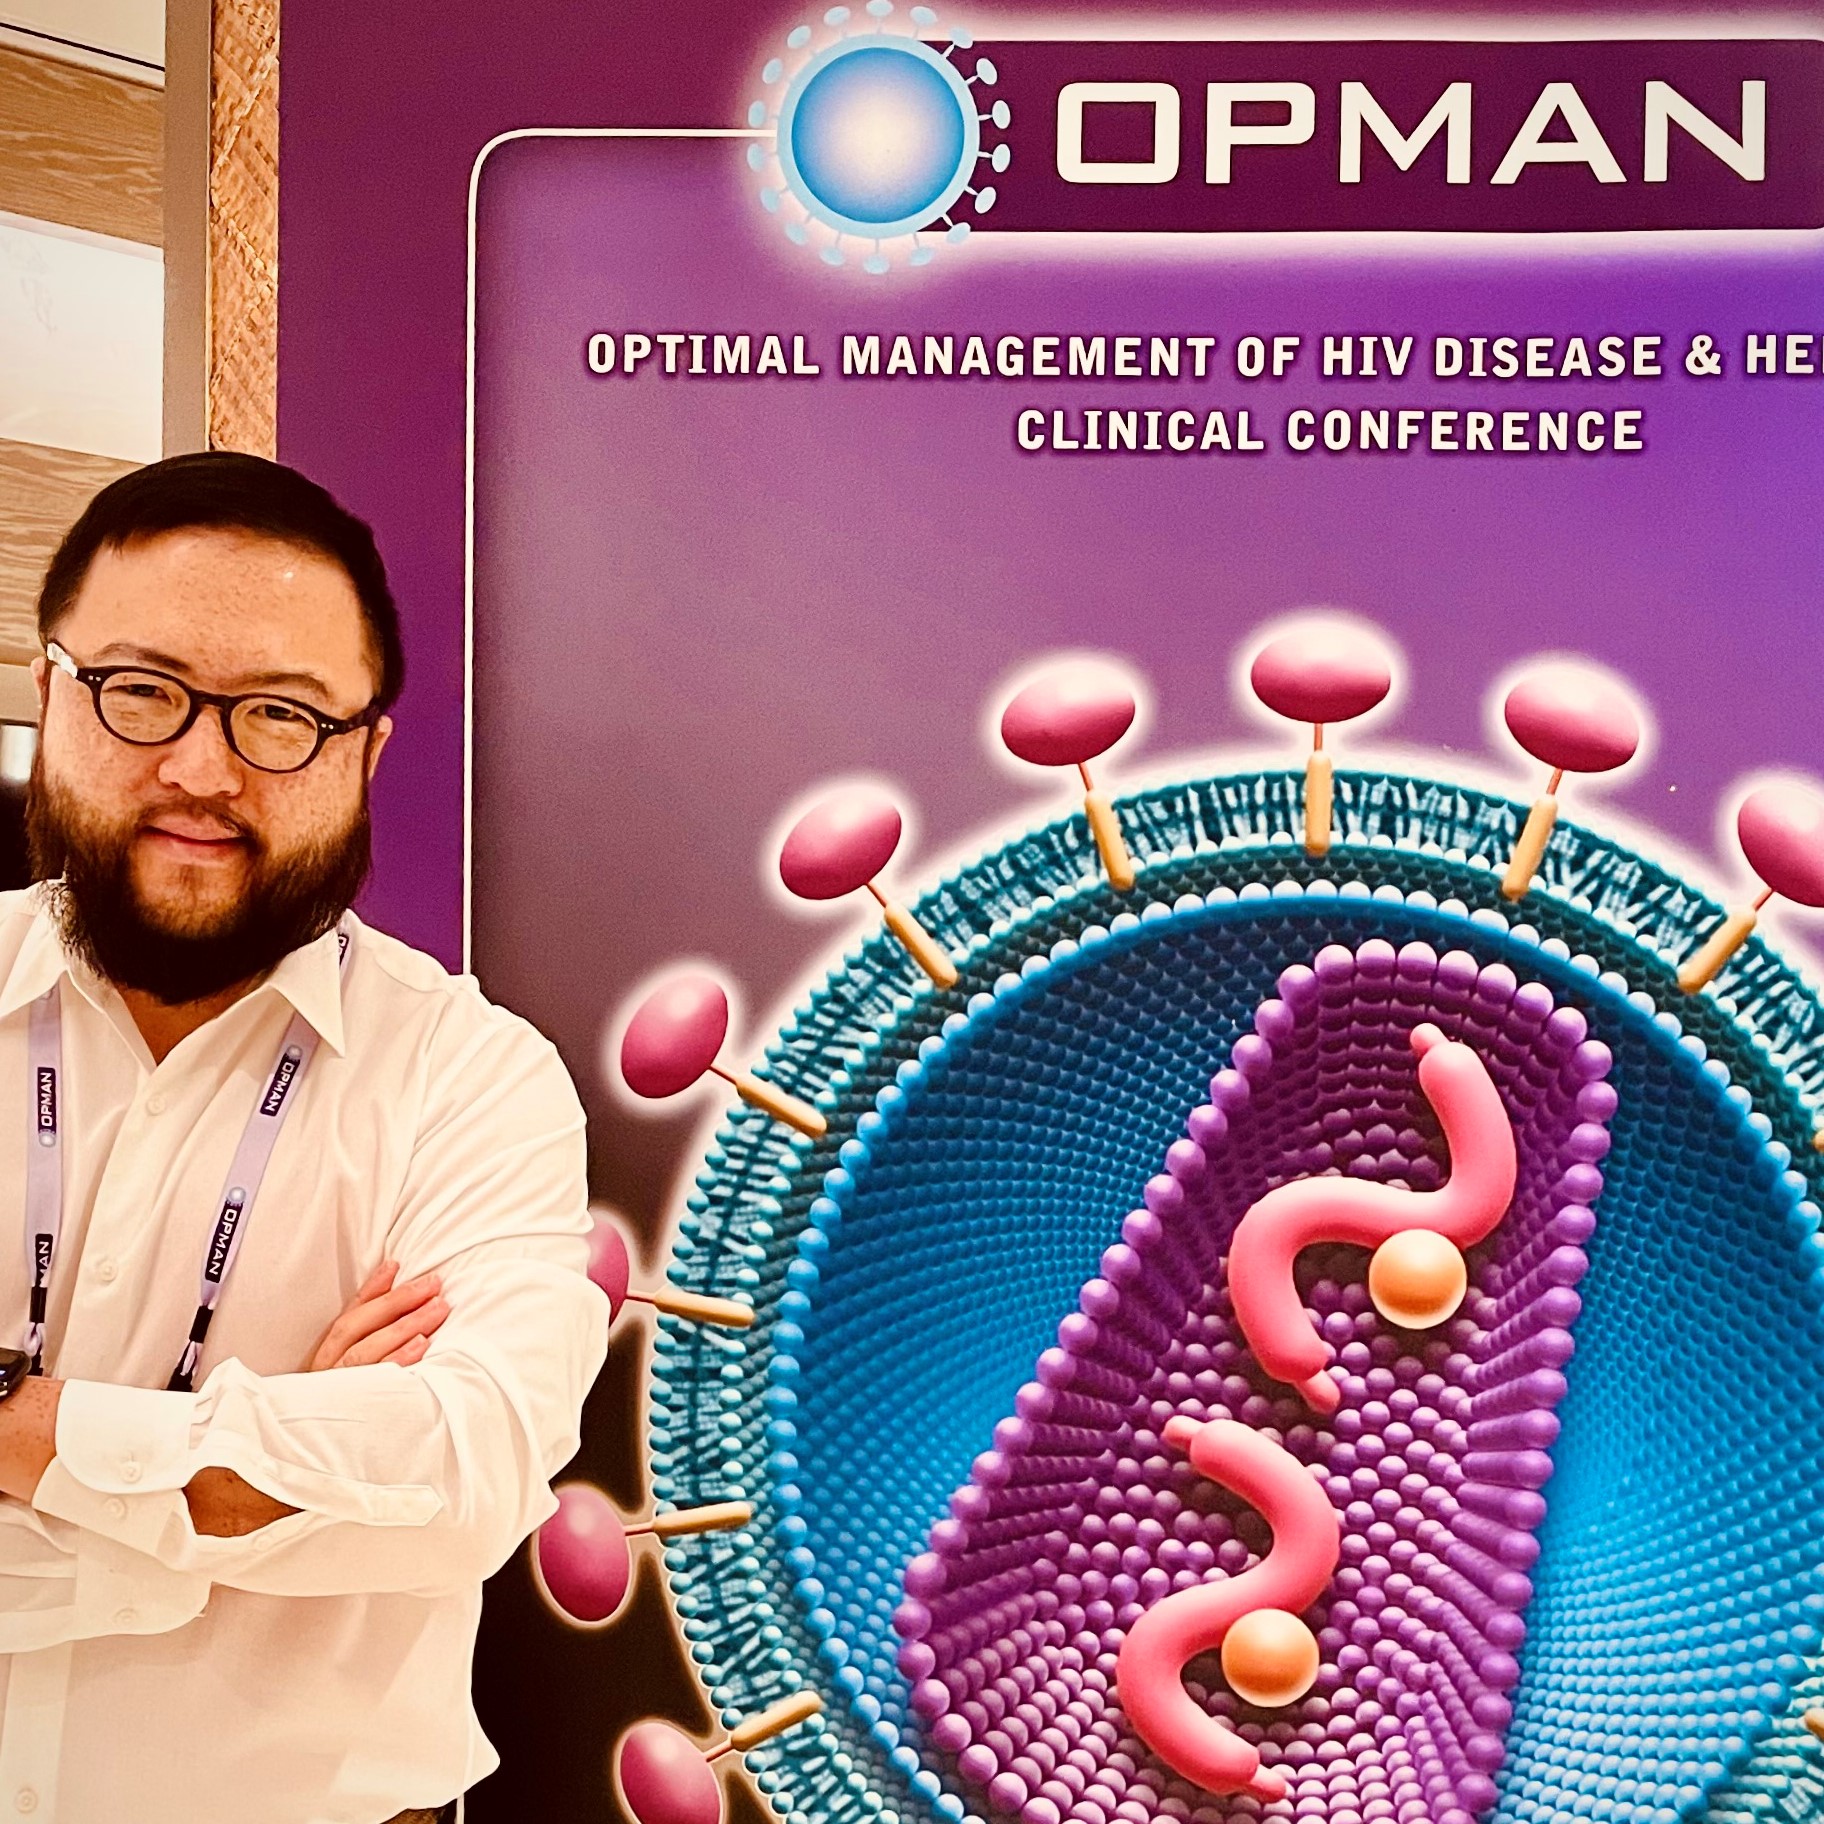 Aaron Kim representing Walgreens at OPMAN, or Optimal Management of HIV Disease & Hepatitis Clinical Conference.